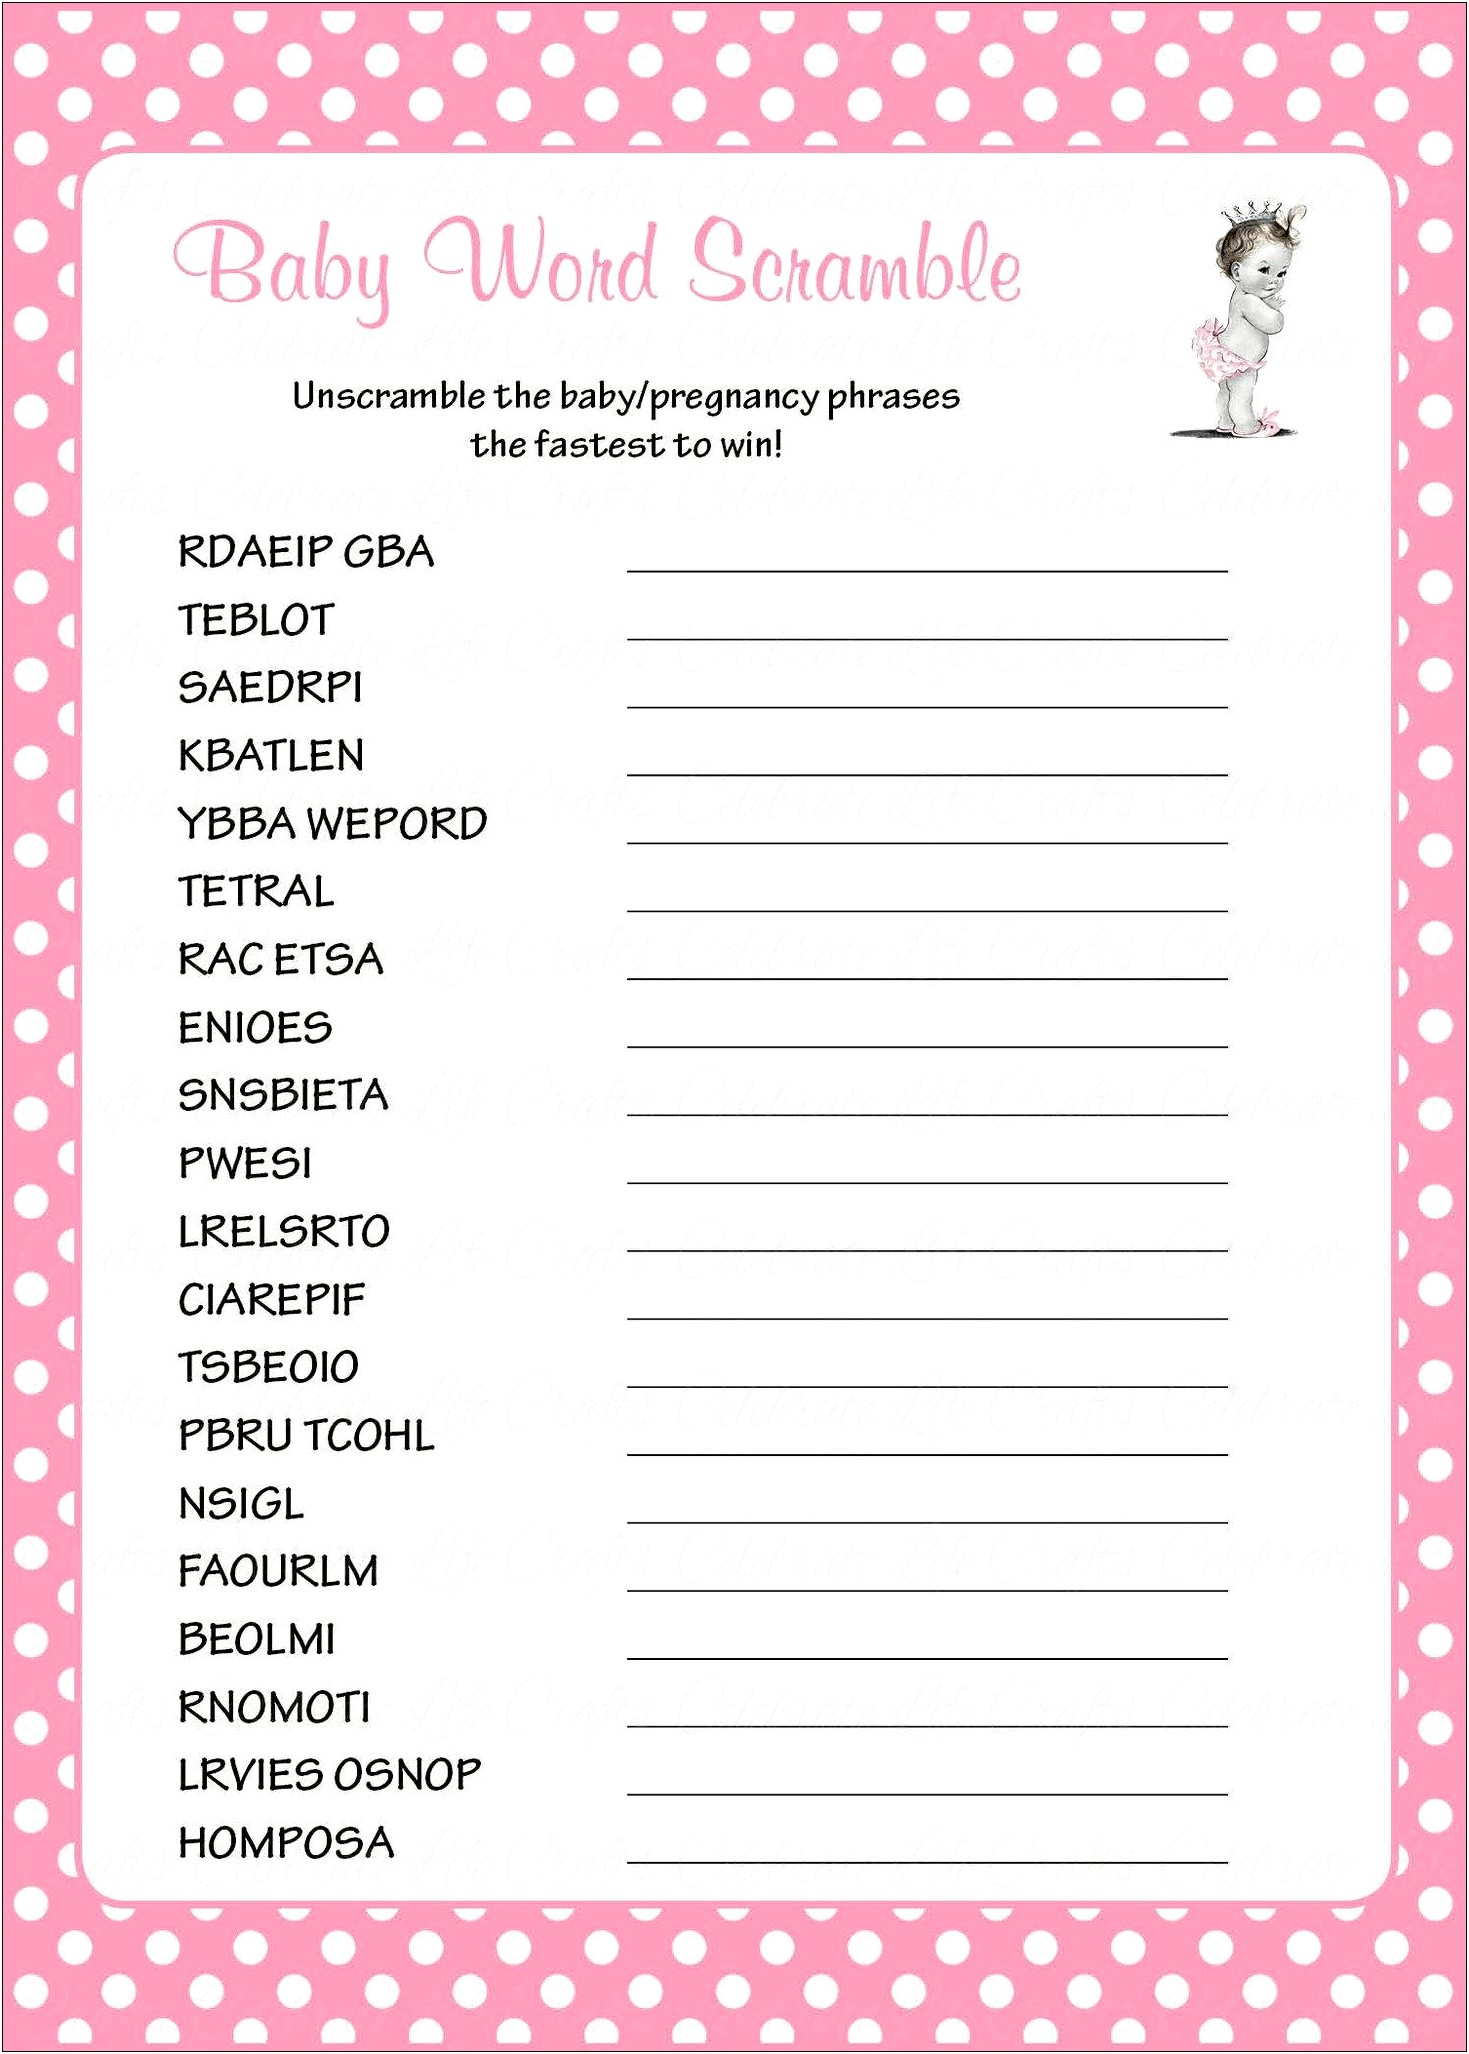 Baby Shower Scramble Words Template Free